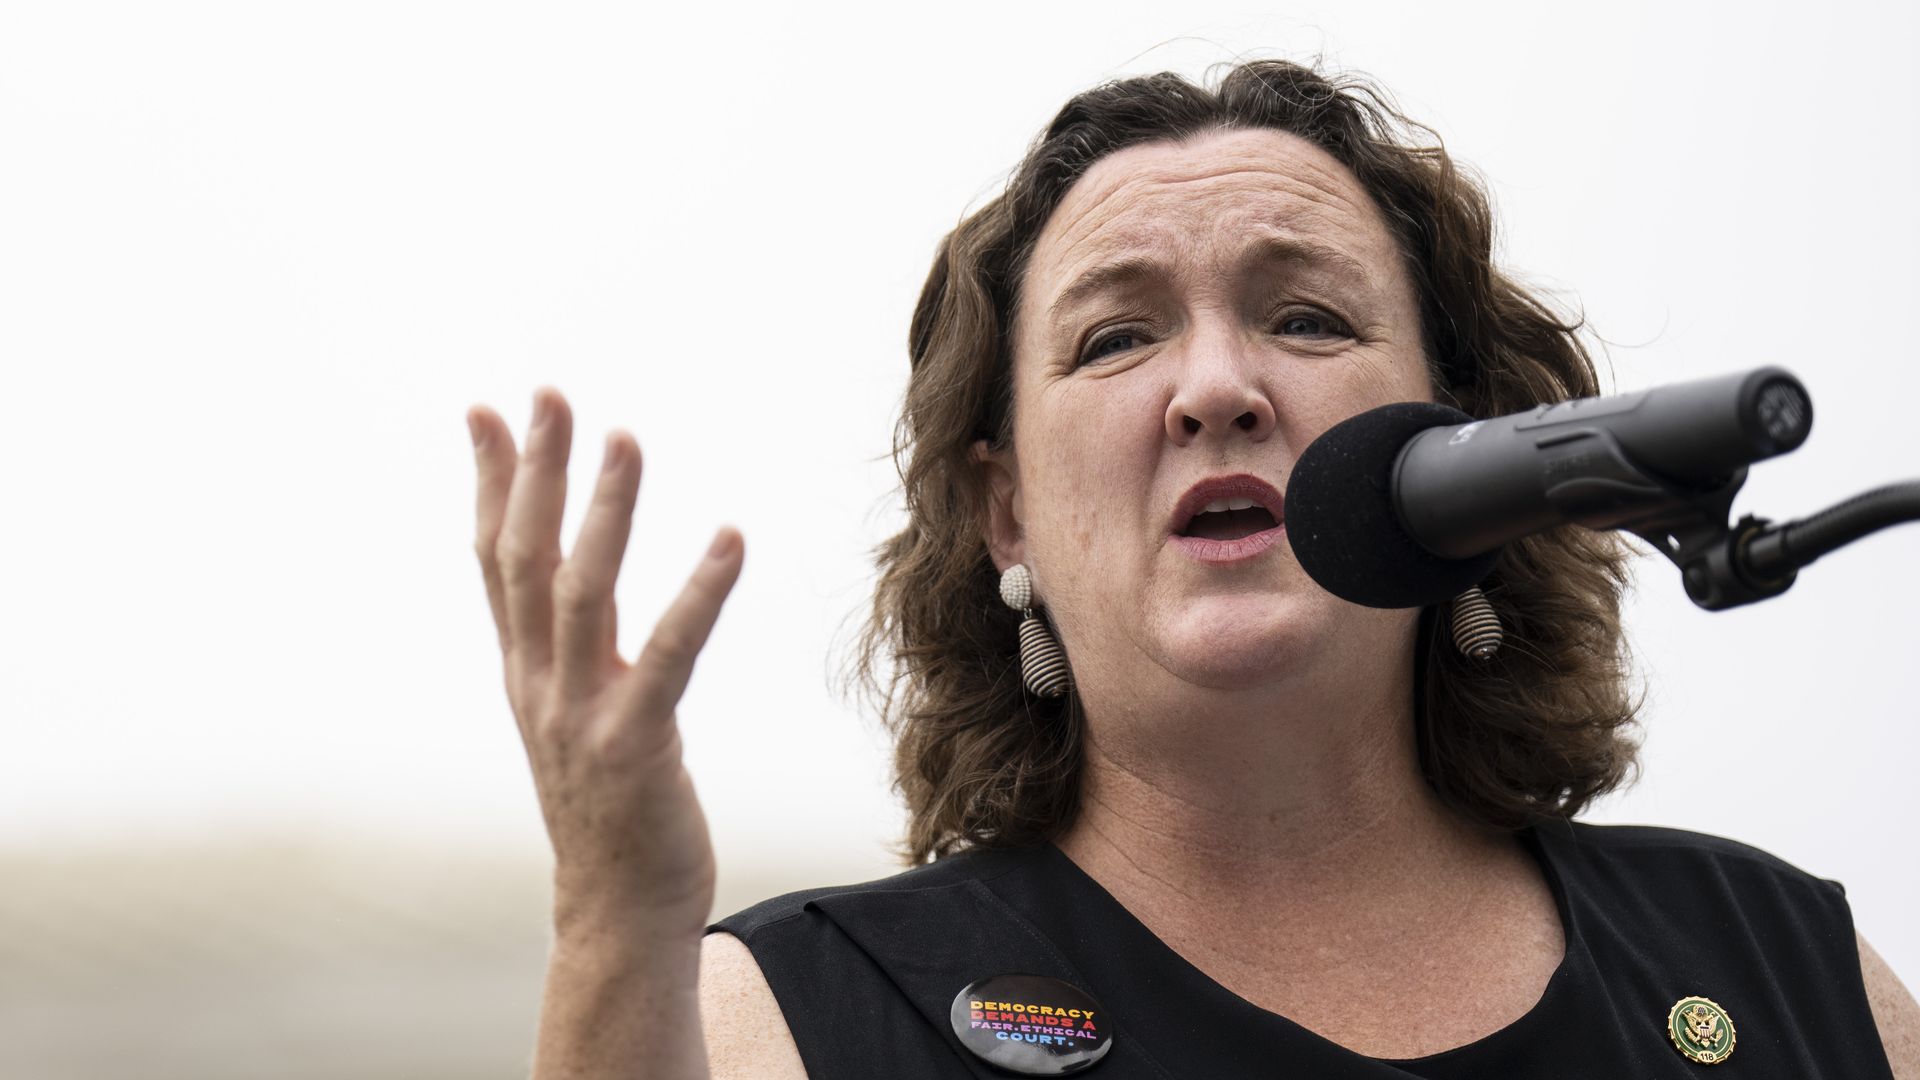 Rep. Katie Porter (D-CA) speaks during a small rally in front of the U.S. Supreme Court calling for ethics reform